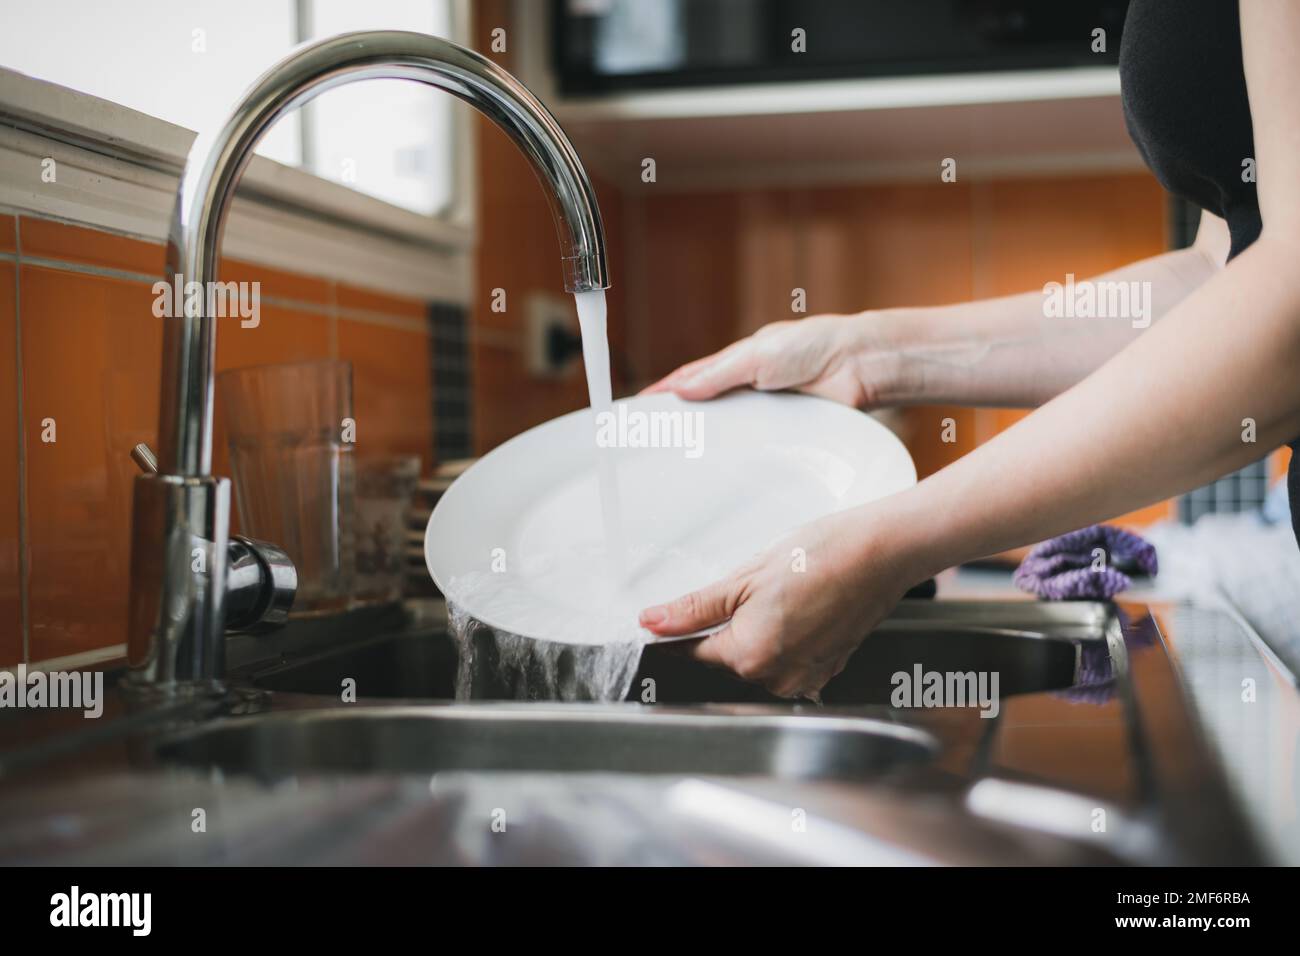 Woman washing dishes in kitchen sink, close up of hands rinsing plate. Stock Photo